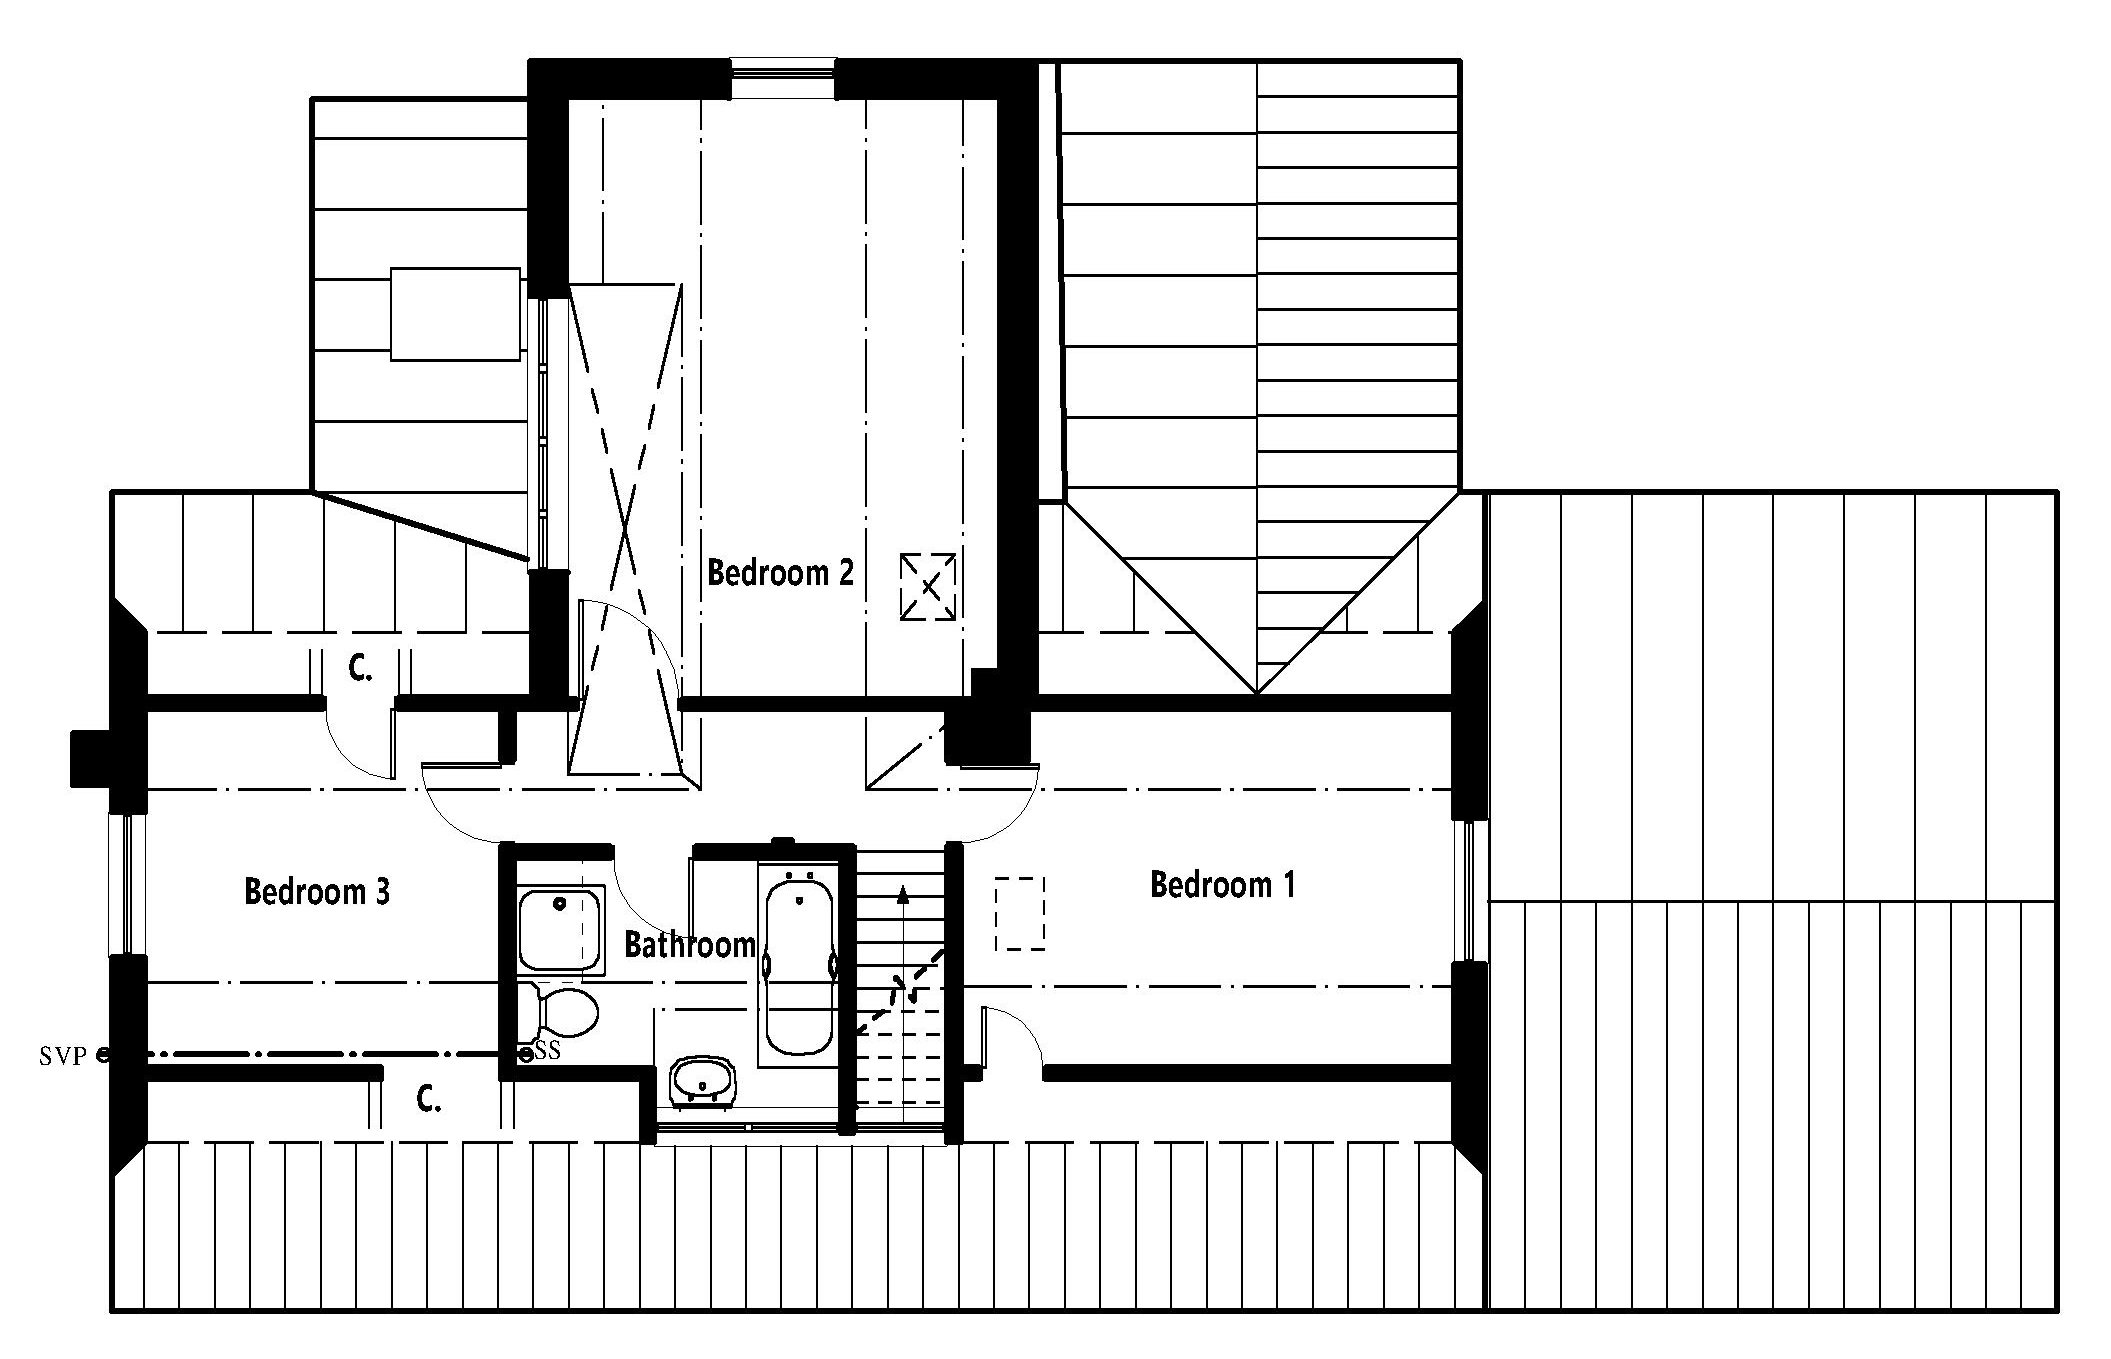 PROPOSED FIRST FLOOR